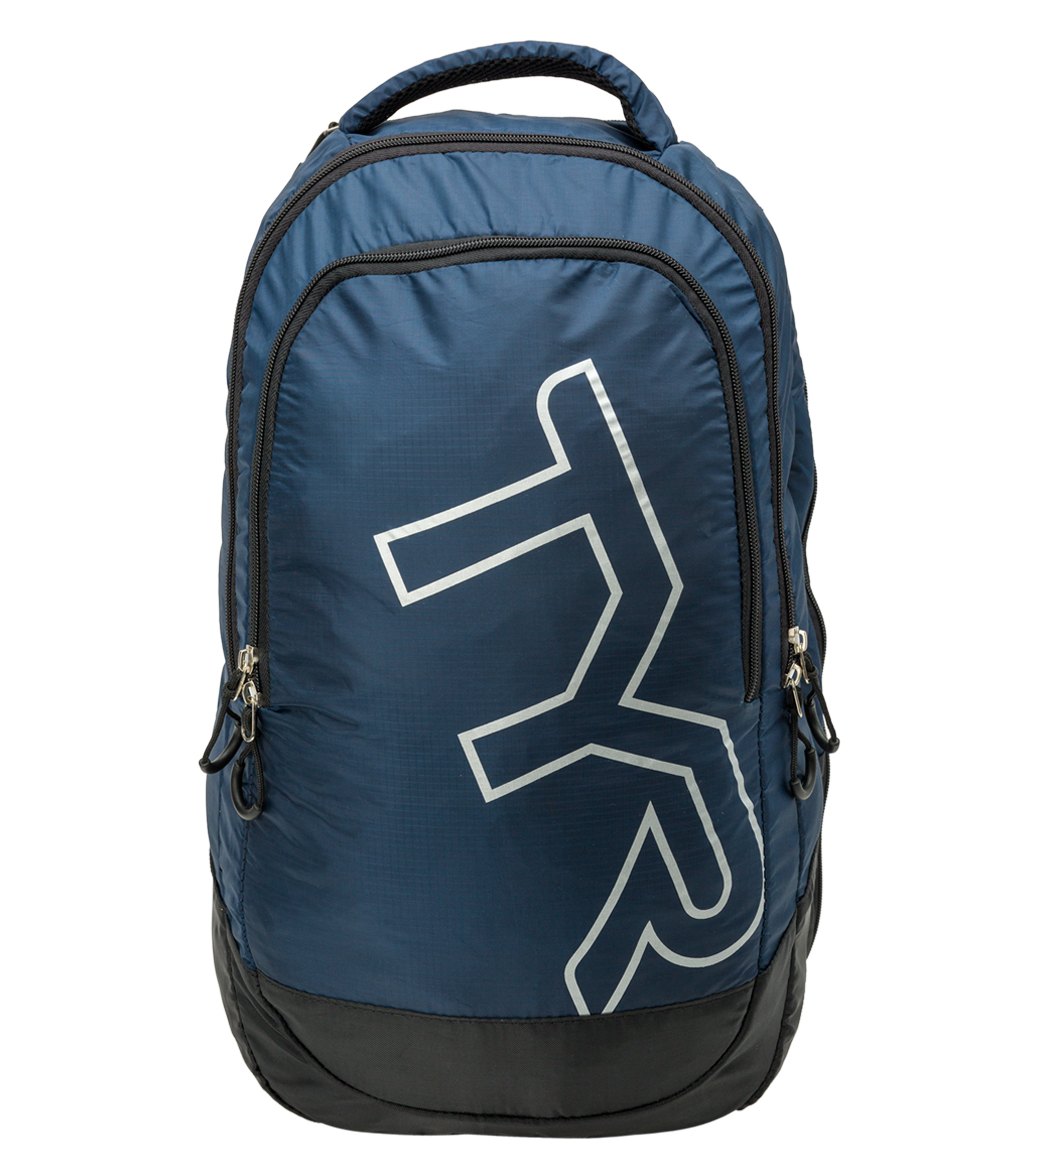 TYR Victory Backpack - Navy Nylon - Swimoutlet.com